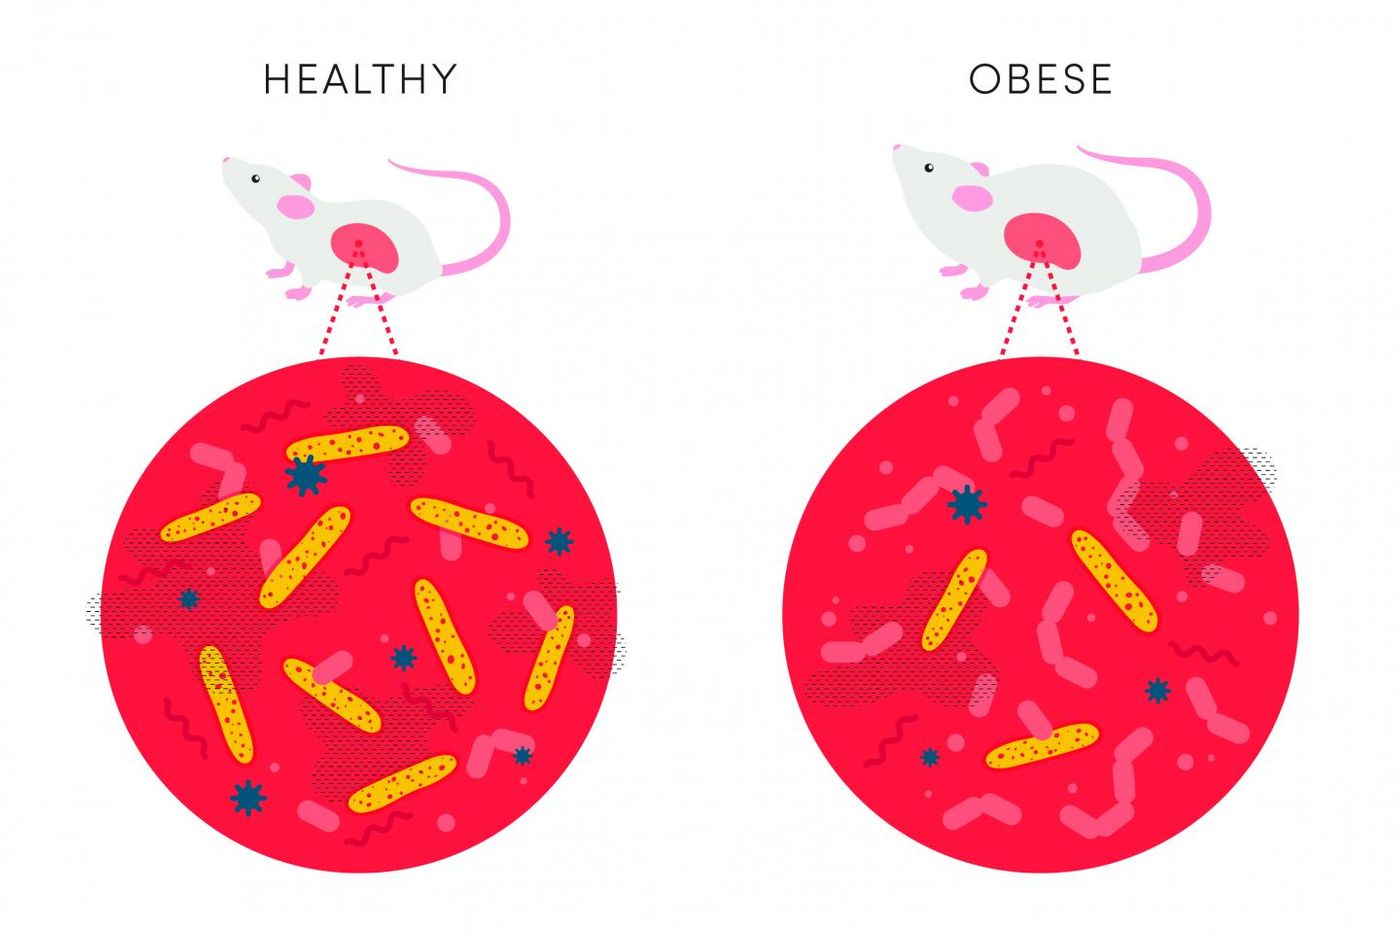 Mice that inevitably become obese have a compromised immune system and less of a class of bacteria called Clostridia in their gut microbiome than healthy mice. Giving Clostridia to the immune-impaired mice prevents obesity. / Credit: Luat Nguyen, University of Utah Health